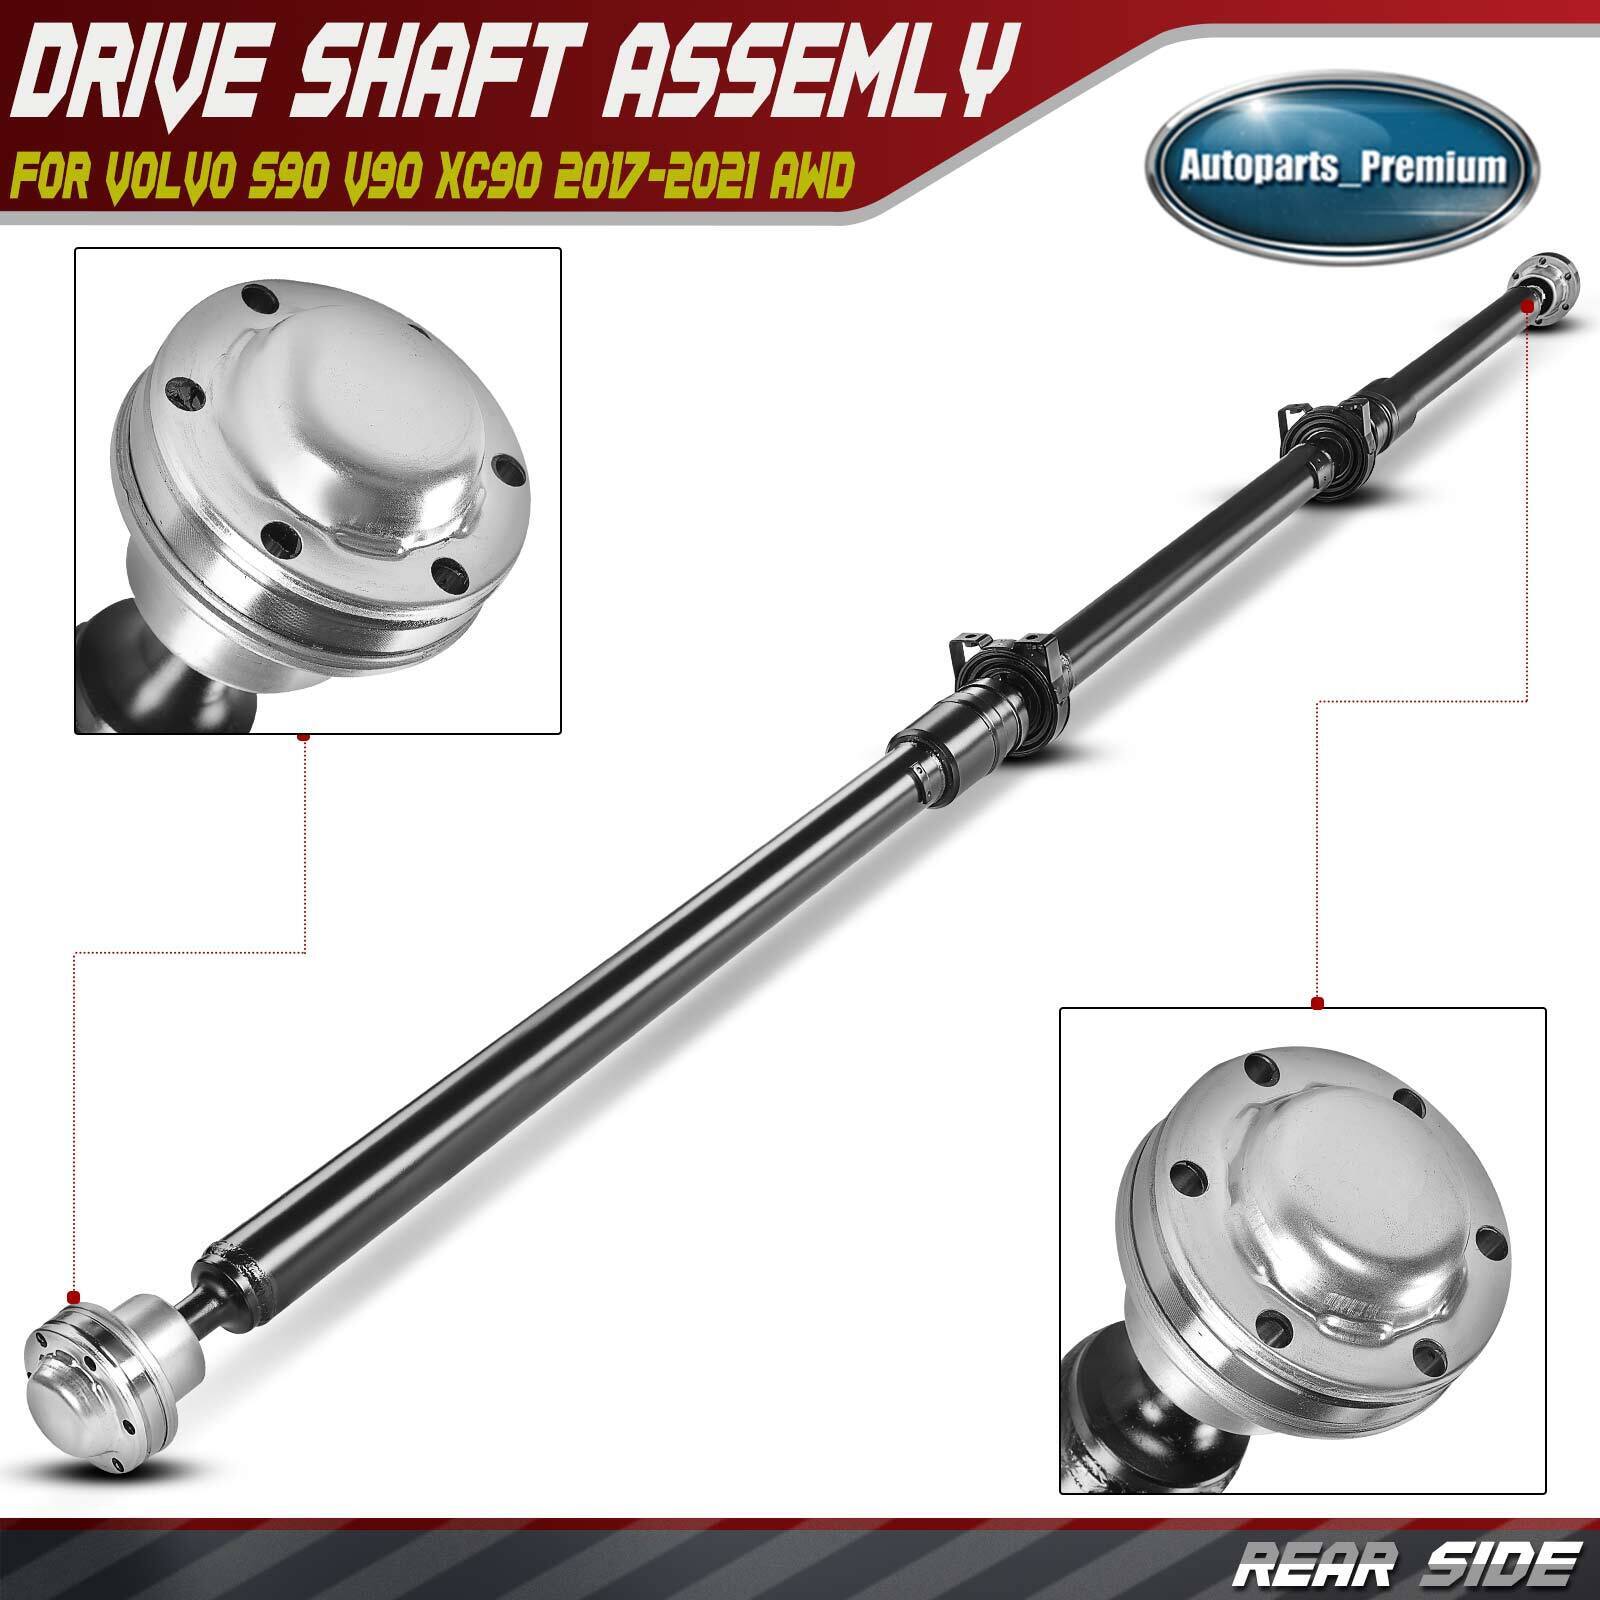 1x Rear Side Driveshaft Prop Shaft Assembly for Volvo S90 V90 XC90 2017-2021 AWD